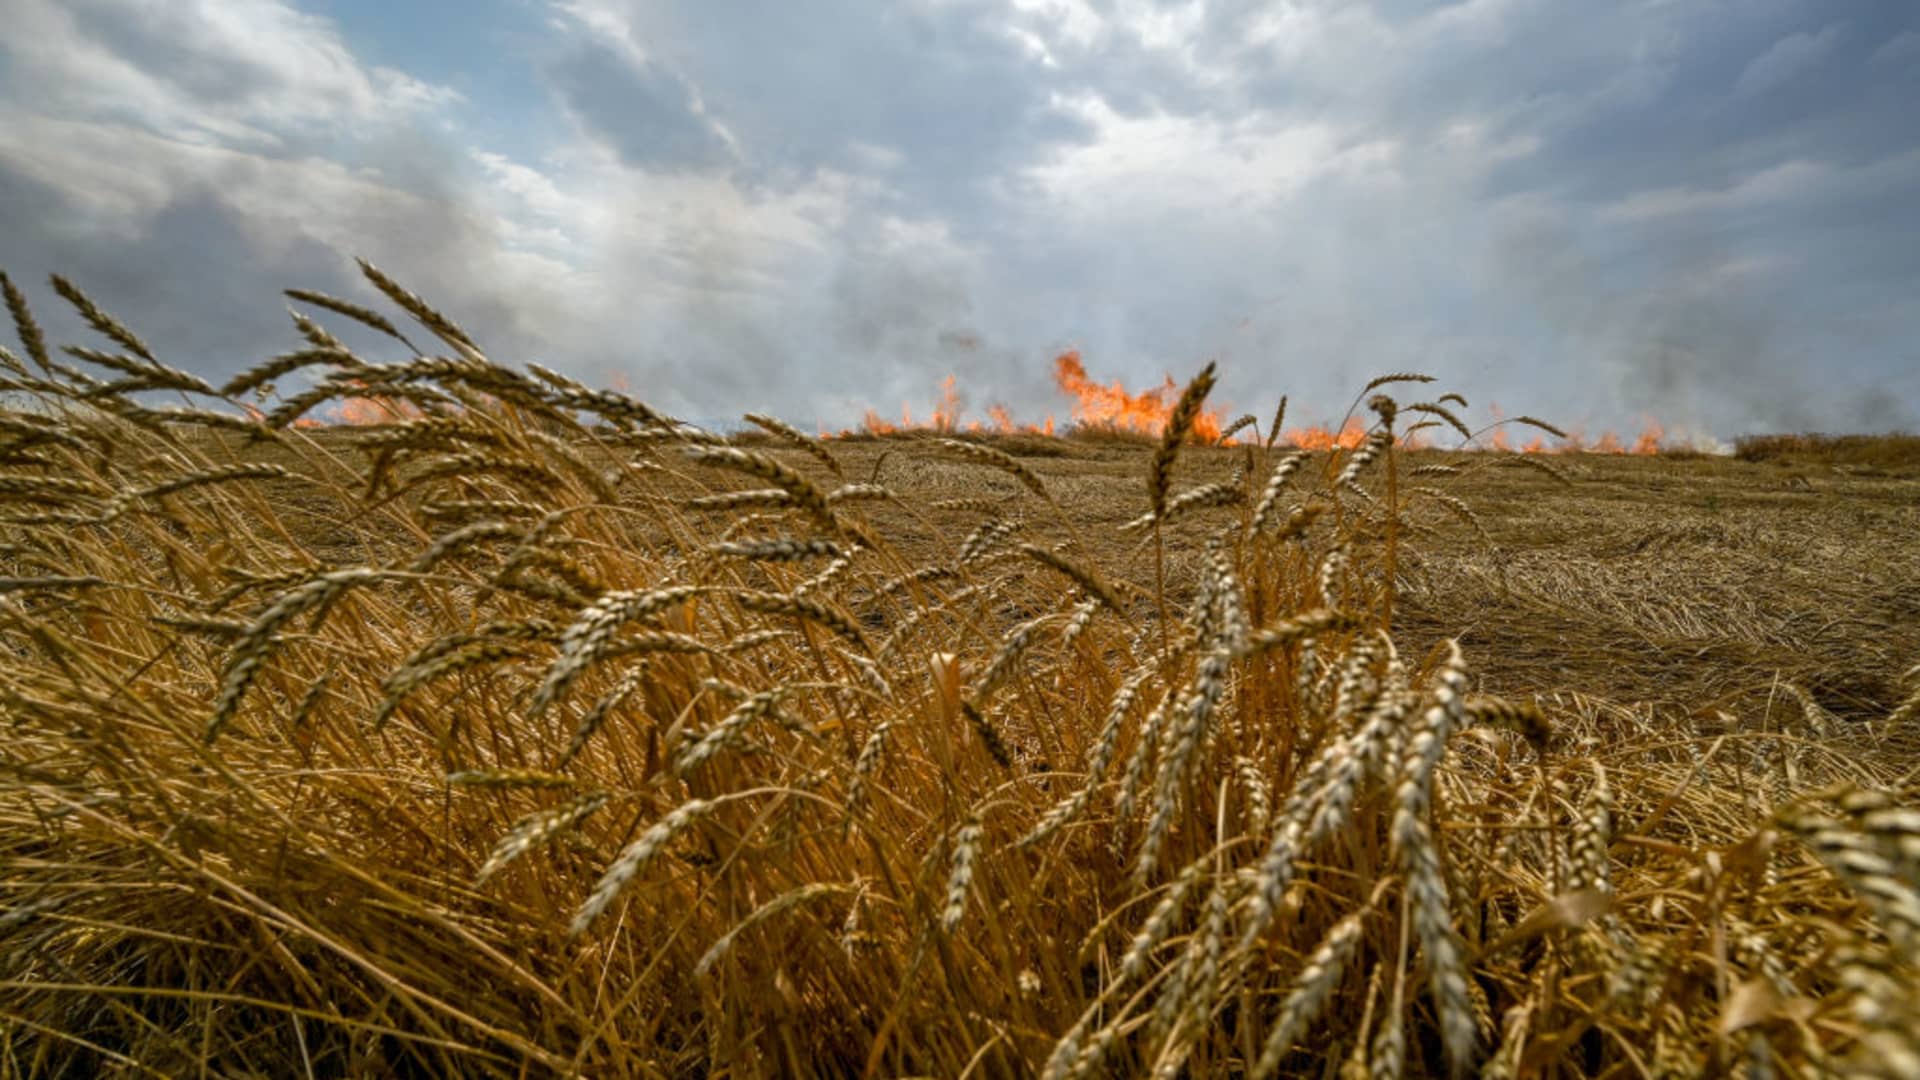 A fire destroys a wheat field as Russian troops shell fields to prevent local farmers from harvesting grain crops, Polohy district, Zaporizhzhia Region, southeastern Ukraine.